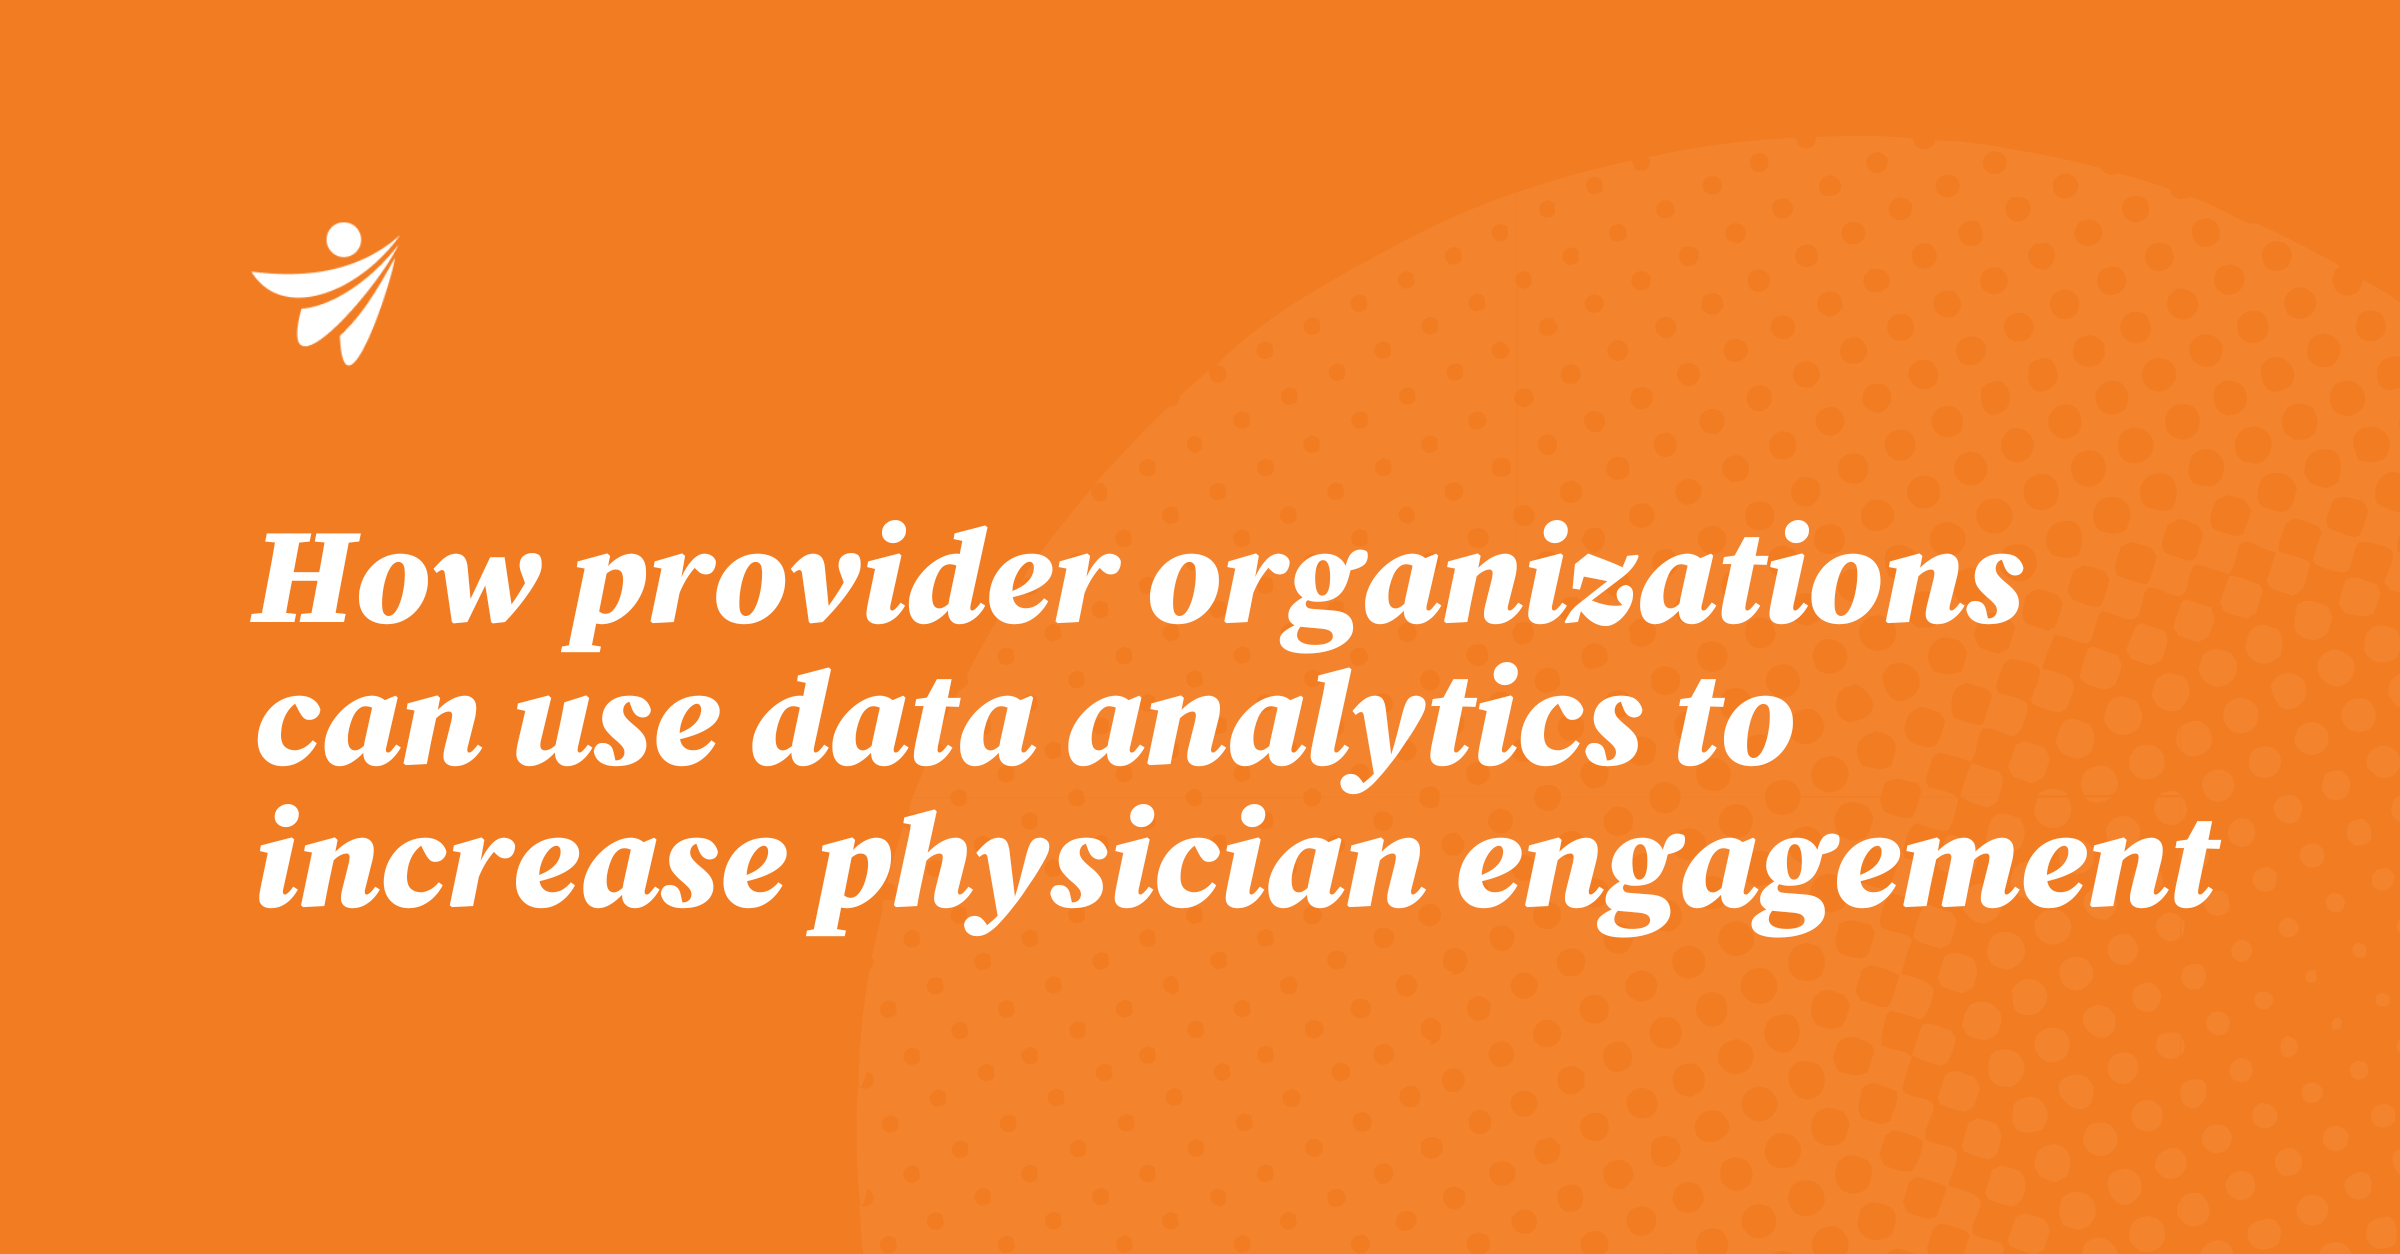 Thumbnail for How provider organizations can use data analytics to increase physician engagement